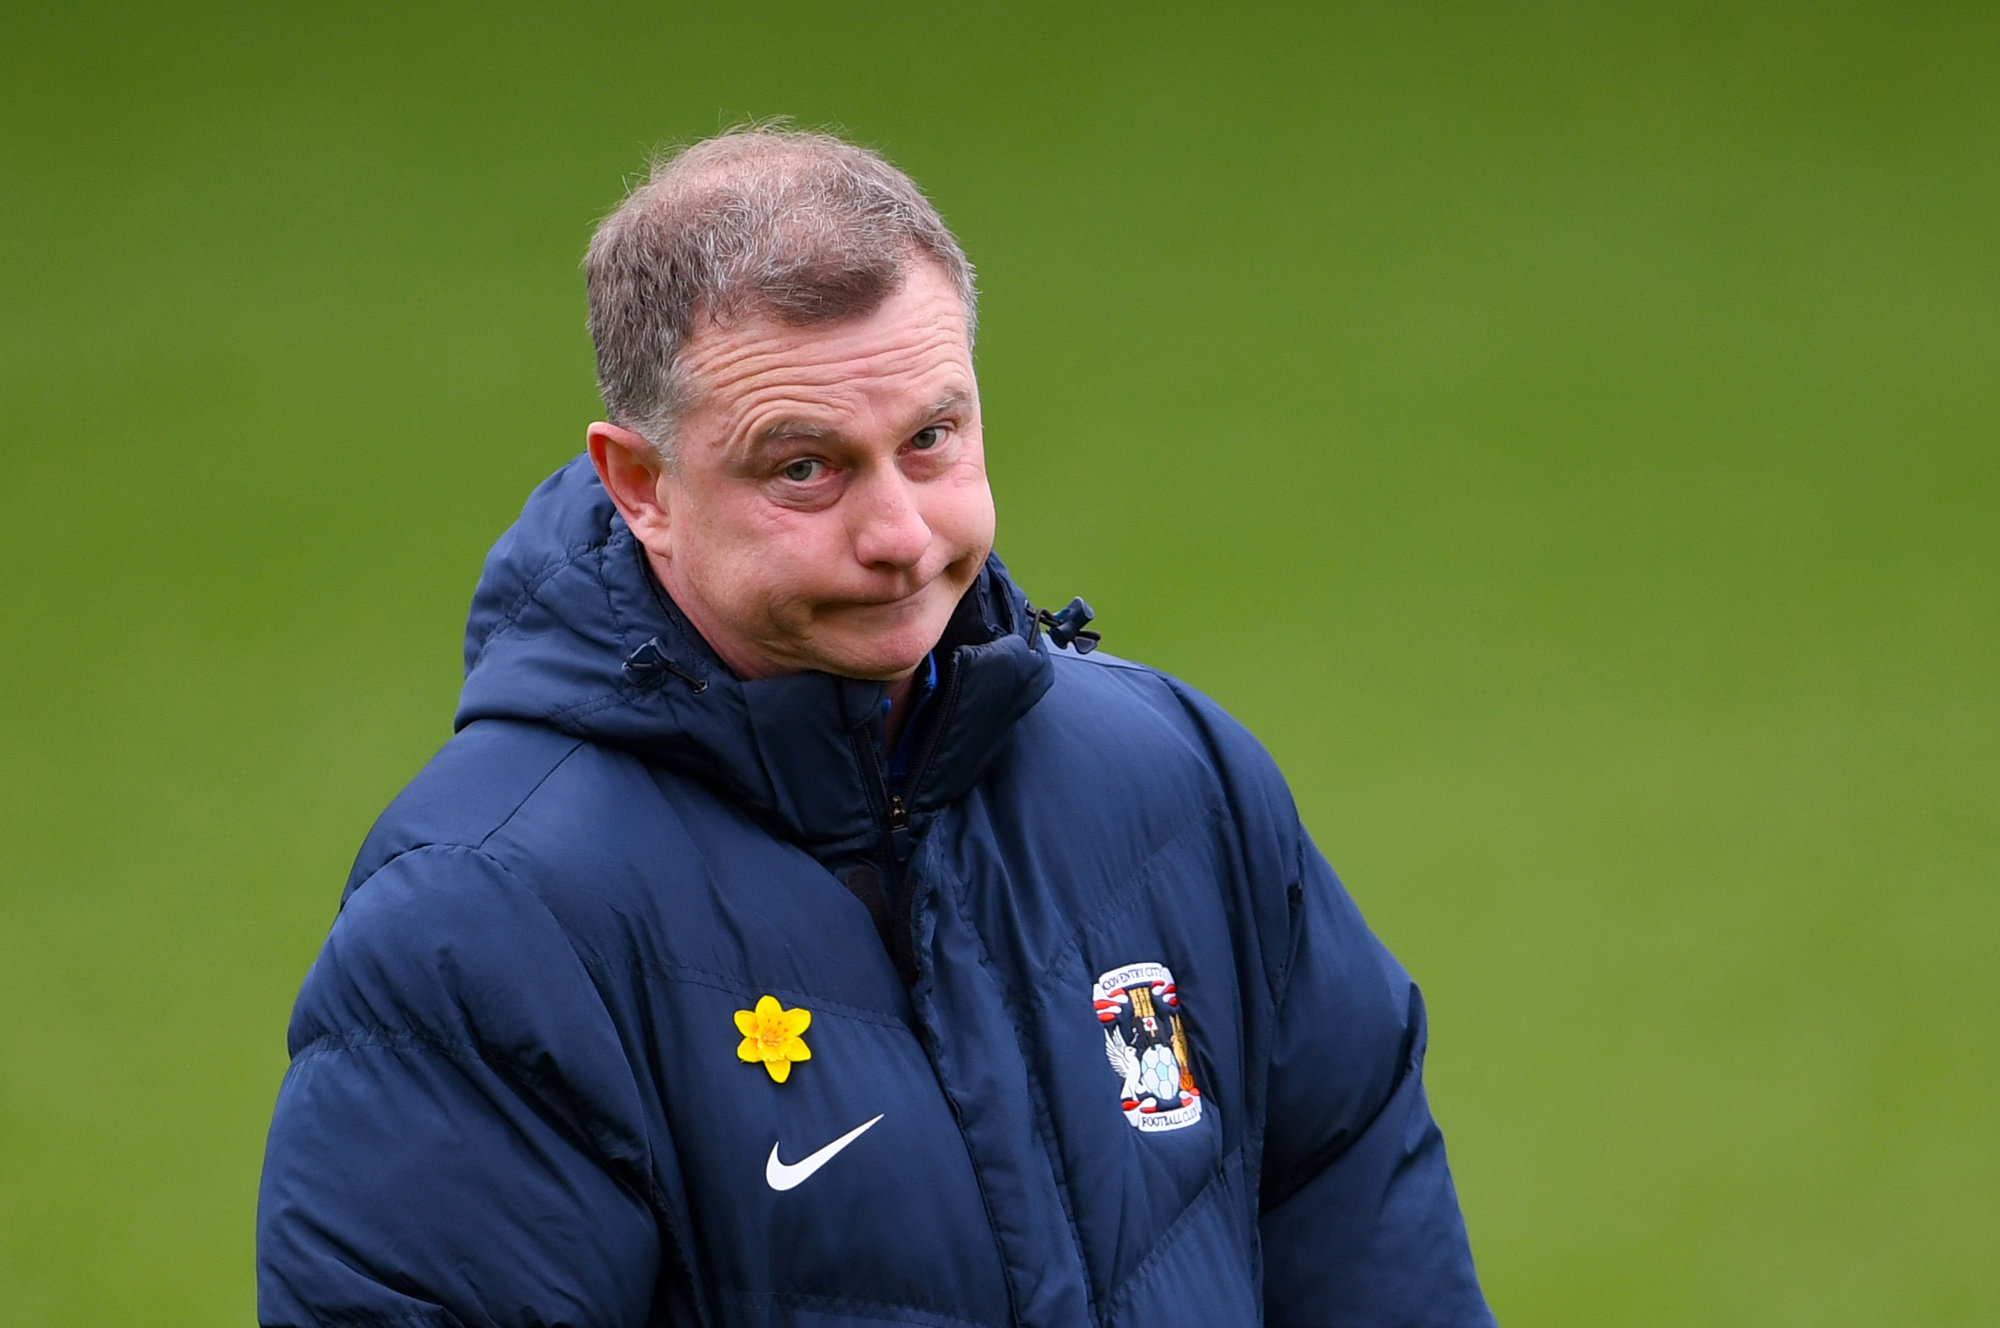 Can Coventry City’s Star Boy Decide The Championship Play-Off Final?